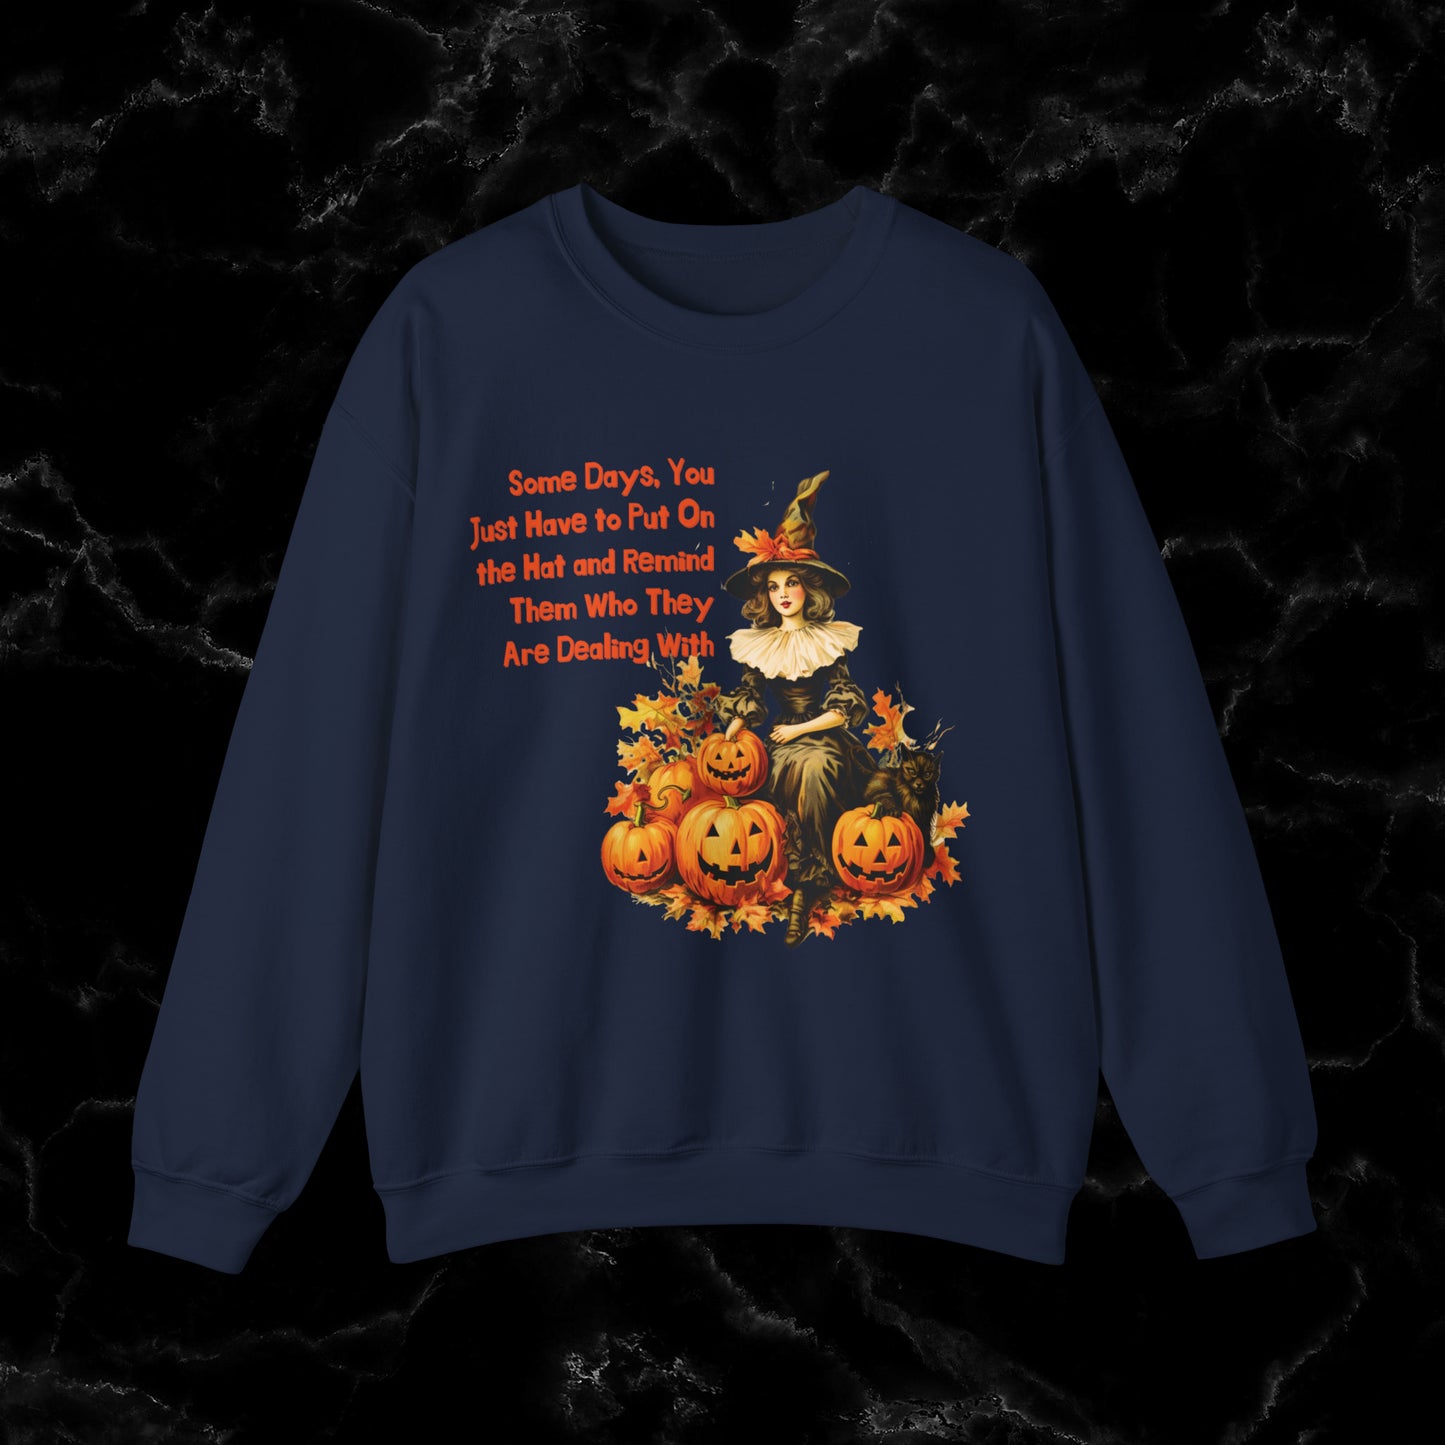 Witch Halloween Gift with Witch Quote - Halloween Sweatshirt - Perfect for Wifes, autunts, Sisters Sweatshirt M Navy 